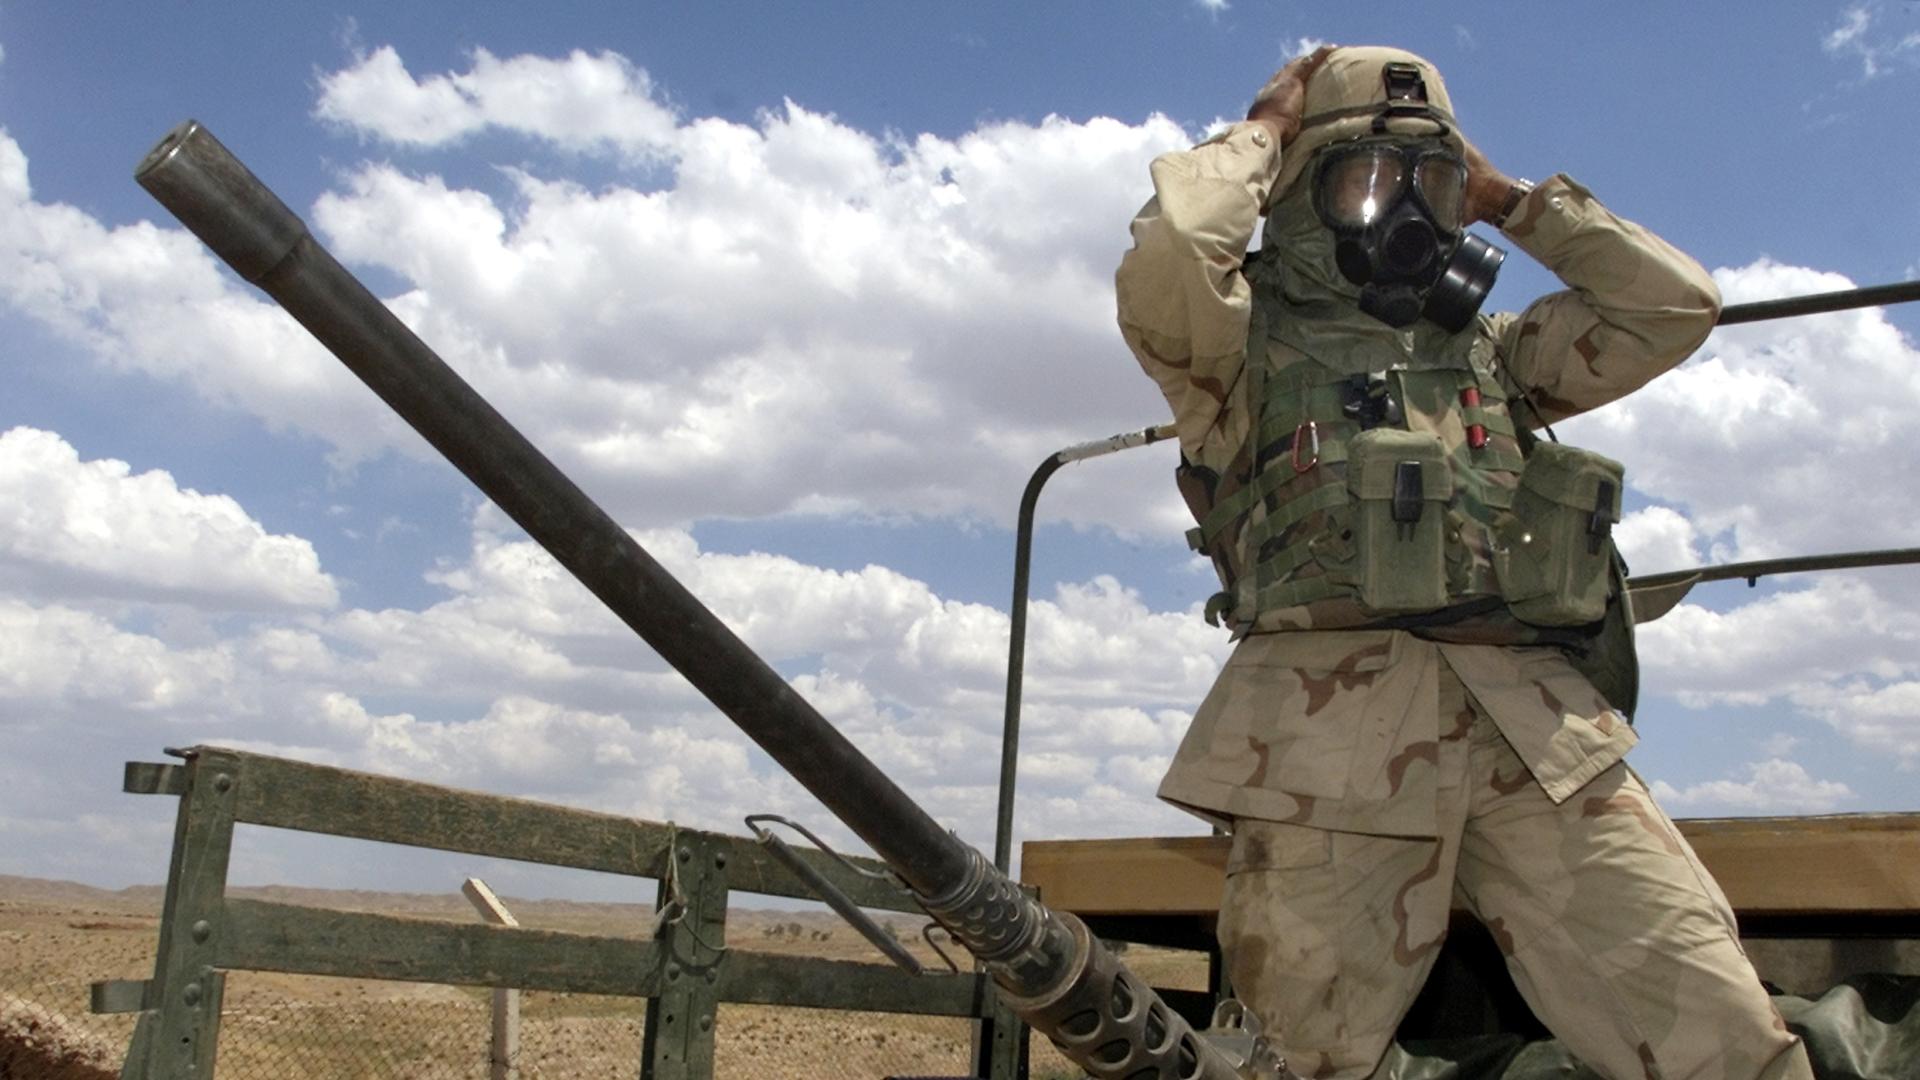 A soldier from the US Army's 173rd Airborne Brigade adjusts his gas mask prior to an air analysis mission near an oil and gas separation plant at the Baba Gurgur oil field outside northern Iraq's town of Kirkuk on May 3, 2003. 